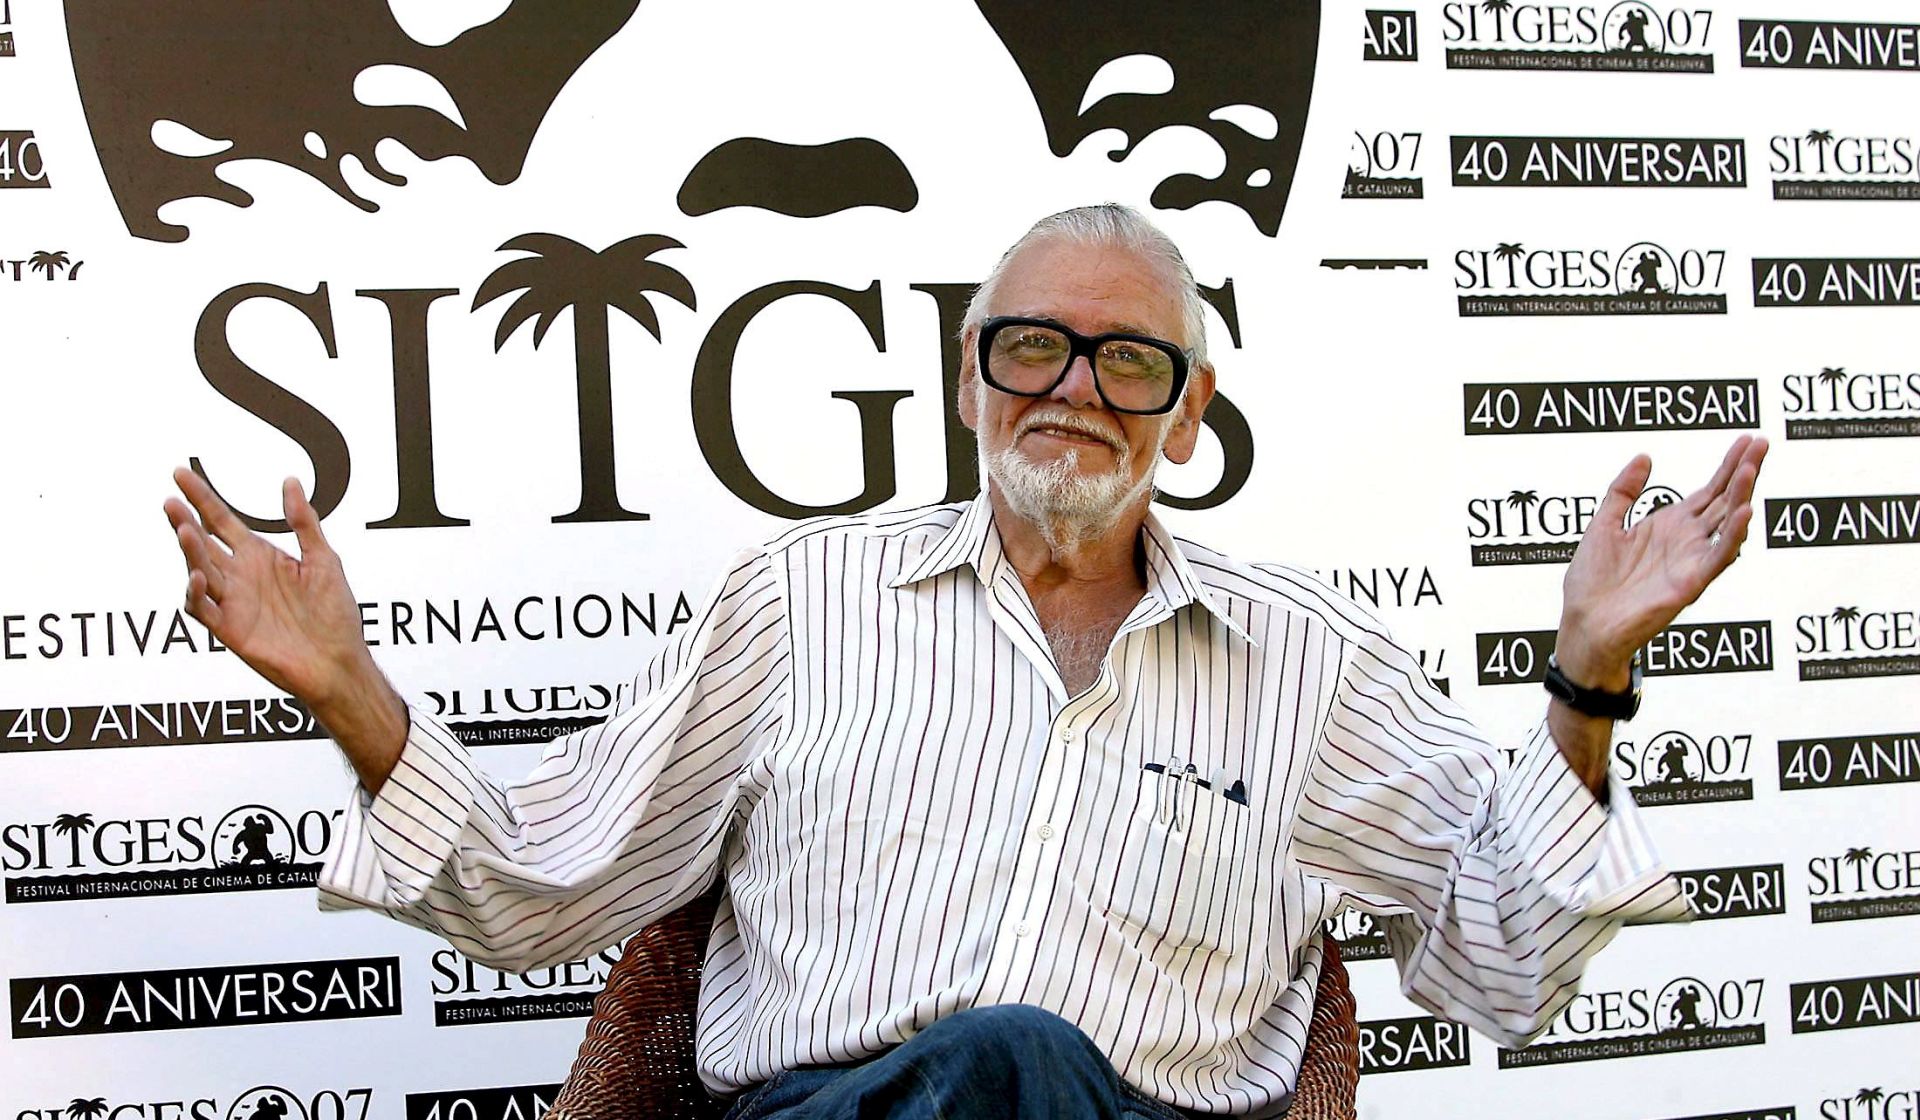 epa06092067 (FILE) - US film director George A. Romero poses for photographers as he presents his film 'Diary of the Dead' as part of 40th Sitges Film Festival in Sitges, Spain, 06 October 2007 (reissued 17 July 2017). Filmmaker George A. Romero, creator of 'Night of the Living Dead' has died at the age of 77 on 16 July 2017, media reported quoting his manager.  EPA/JAUME SELLART